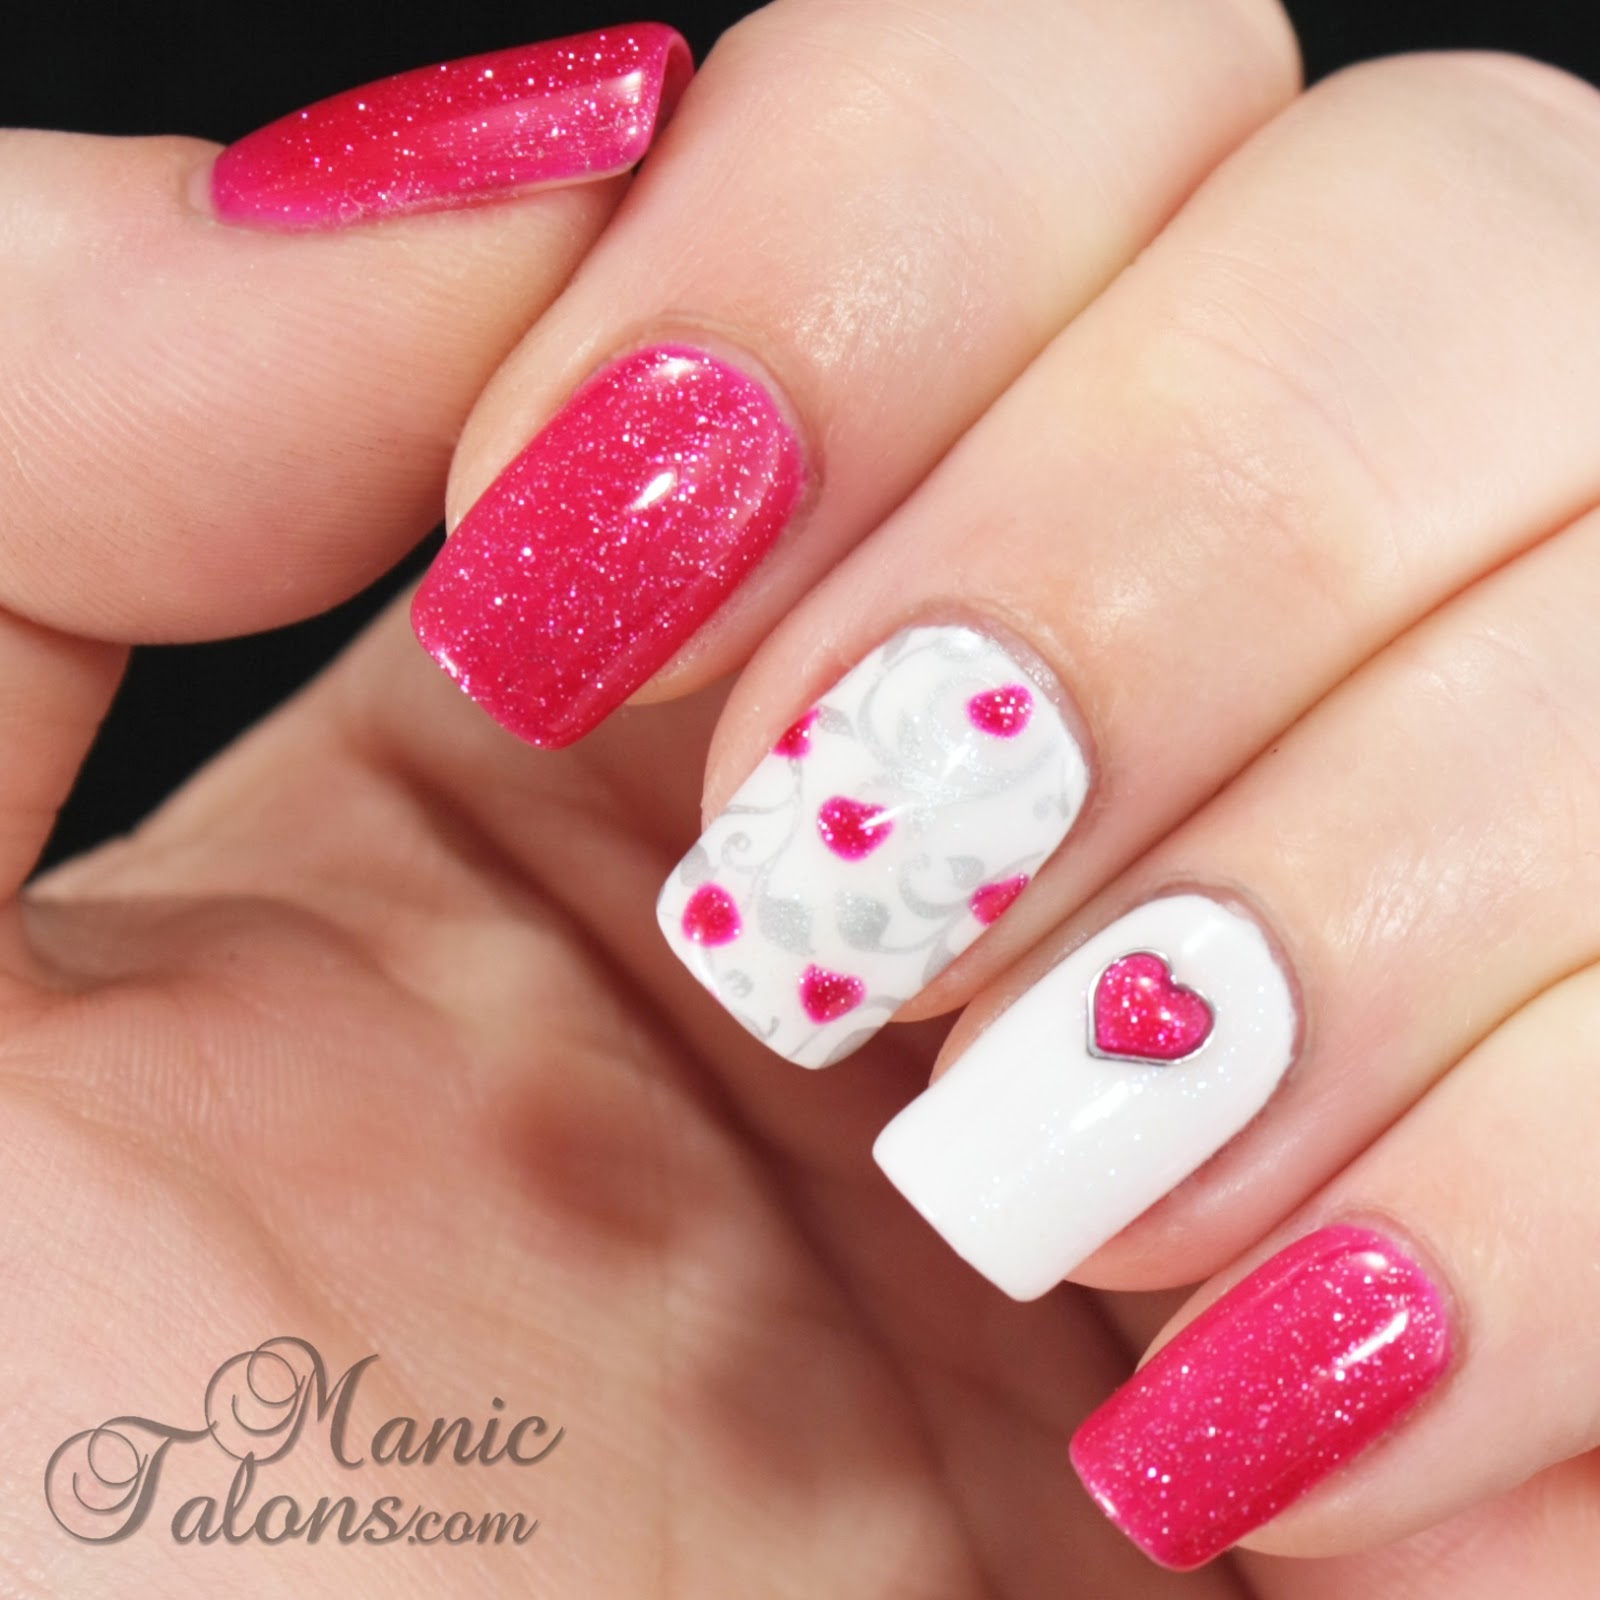 Manic Talons Nail Design: Valentine's Day nails with Red Carpet Manicure